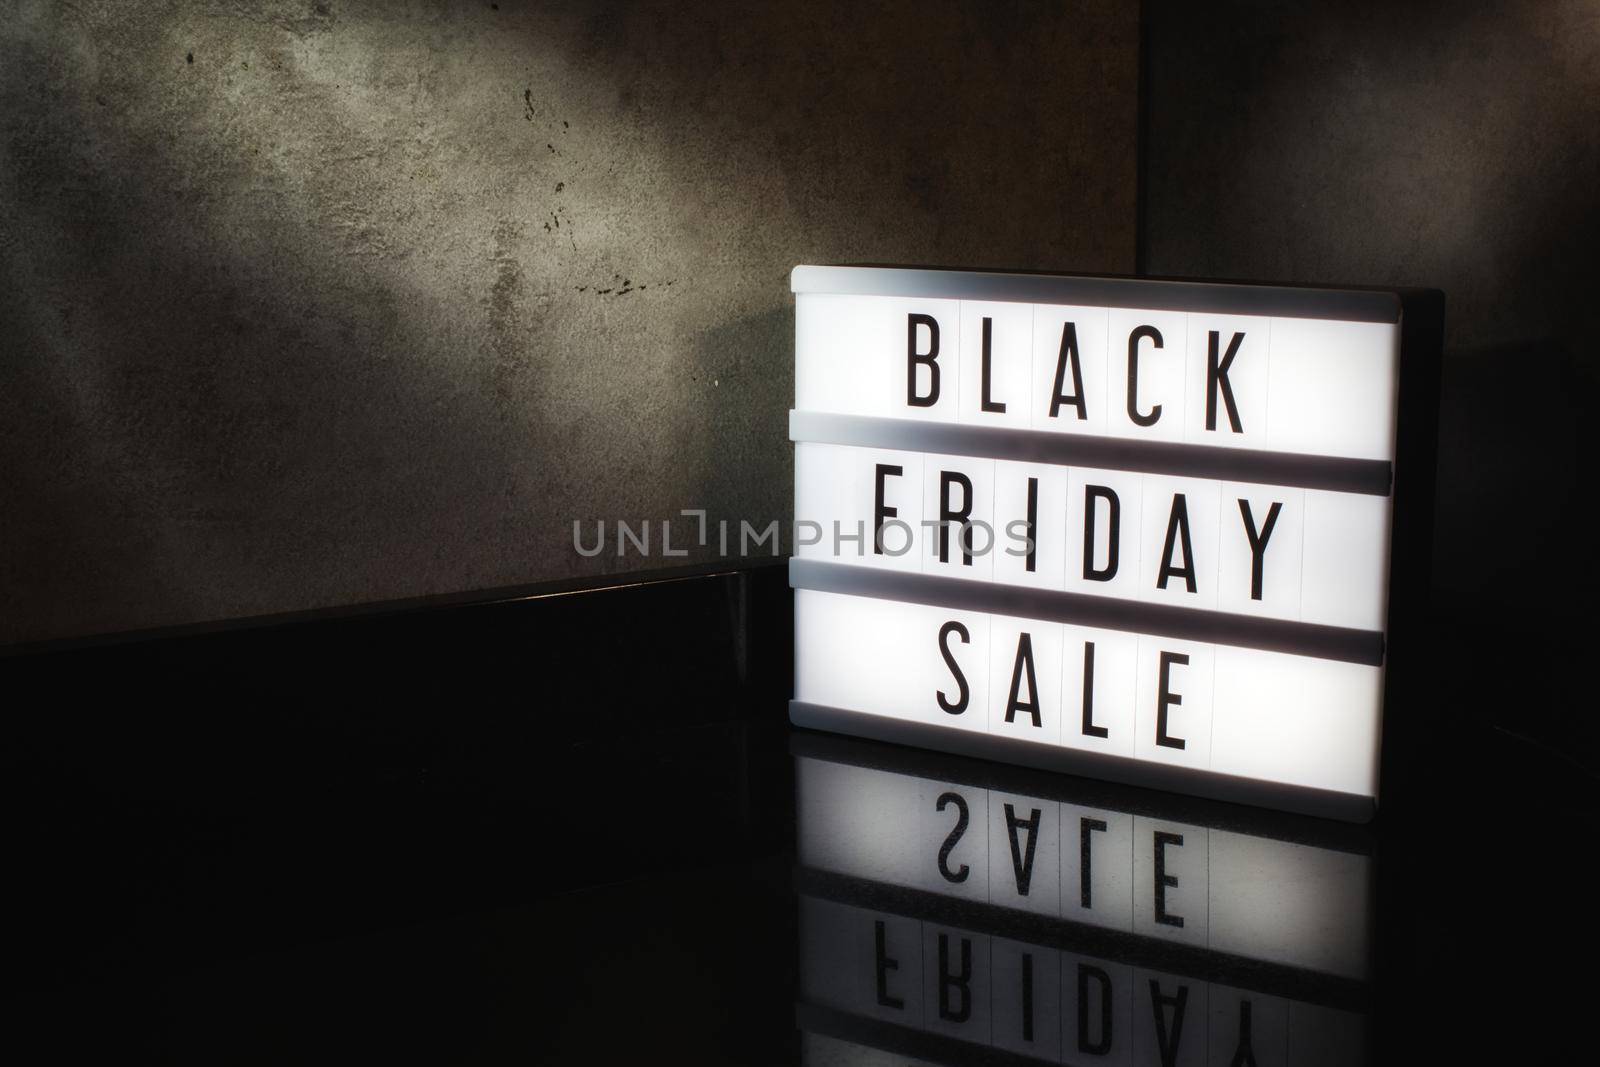 Black Friday Sale message on a light box with a dark cinematic feel